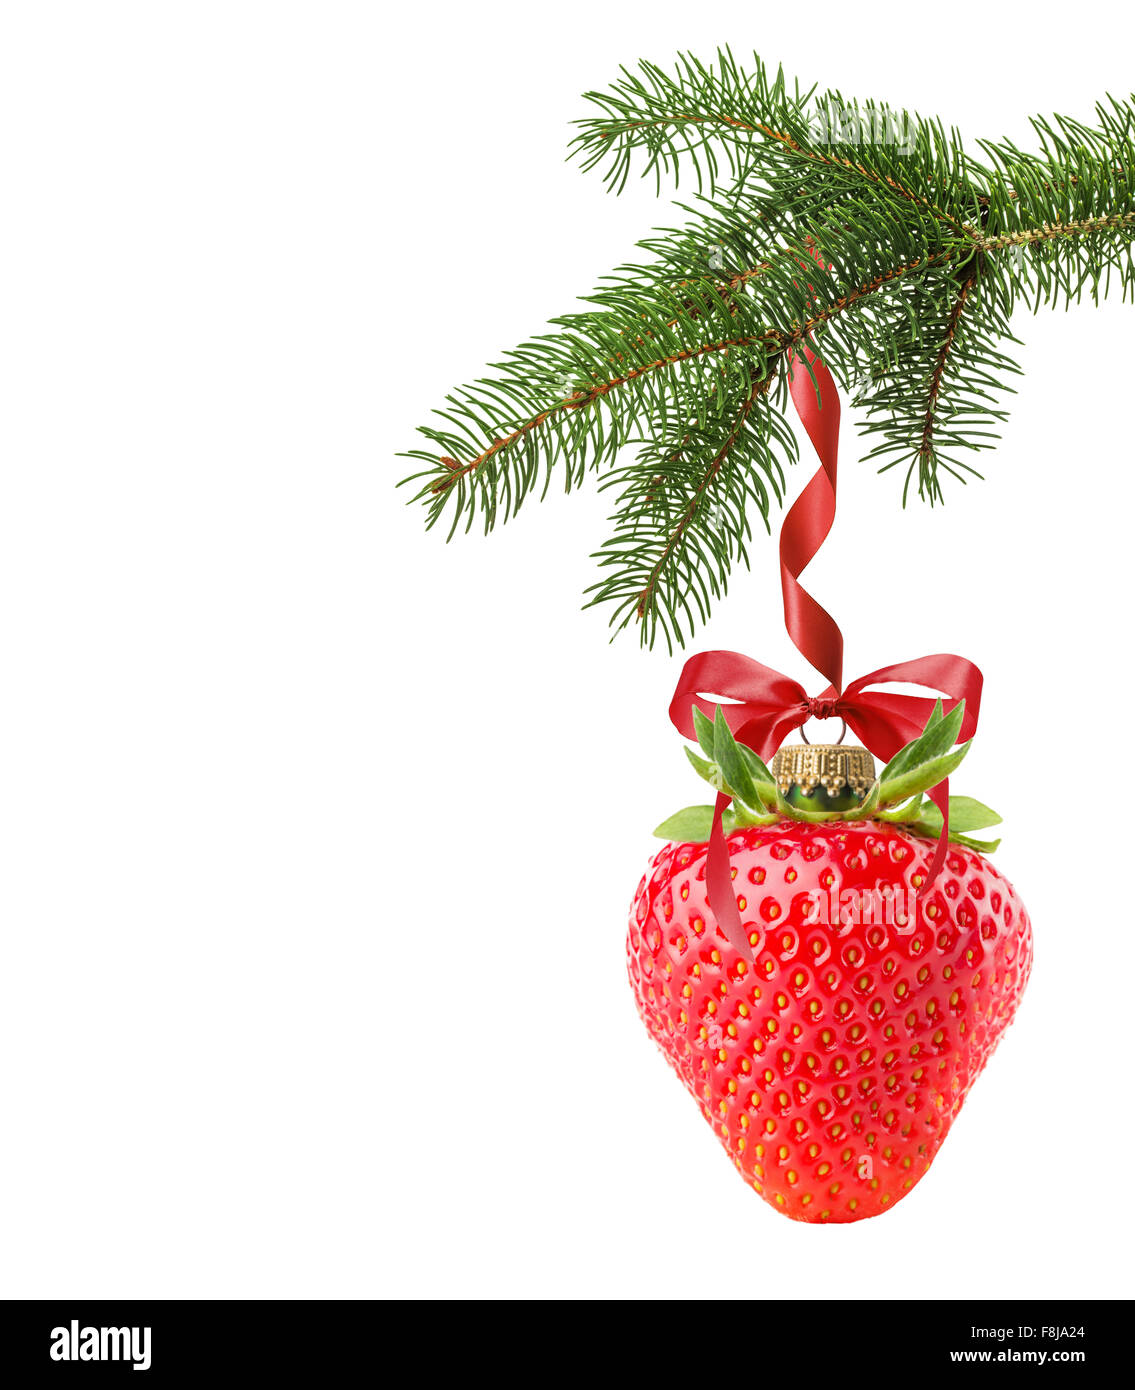 Christmas tree branch with Christmas ball in shape of strawberry isolated on the white background. Stock Photo